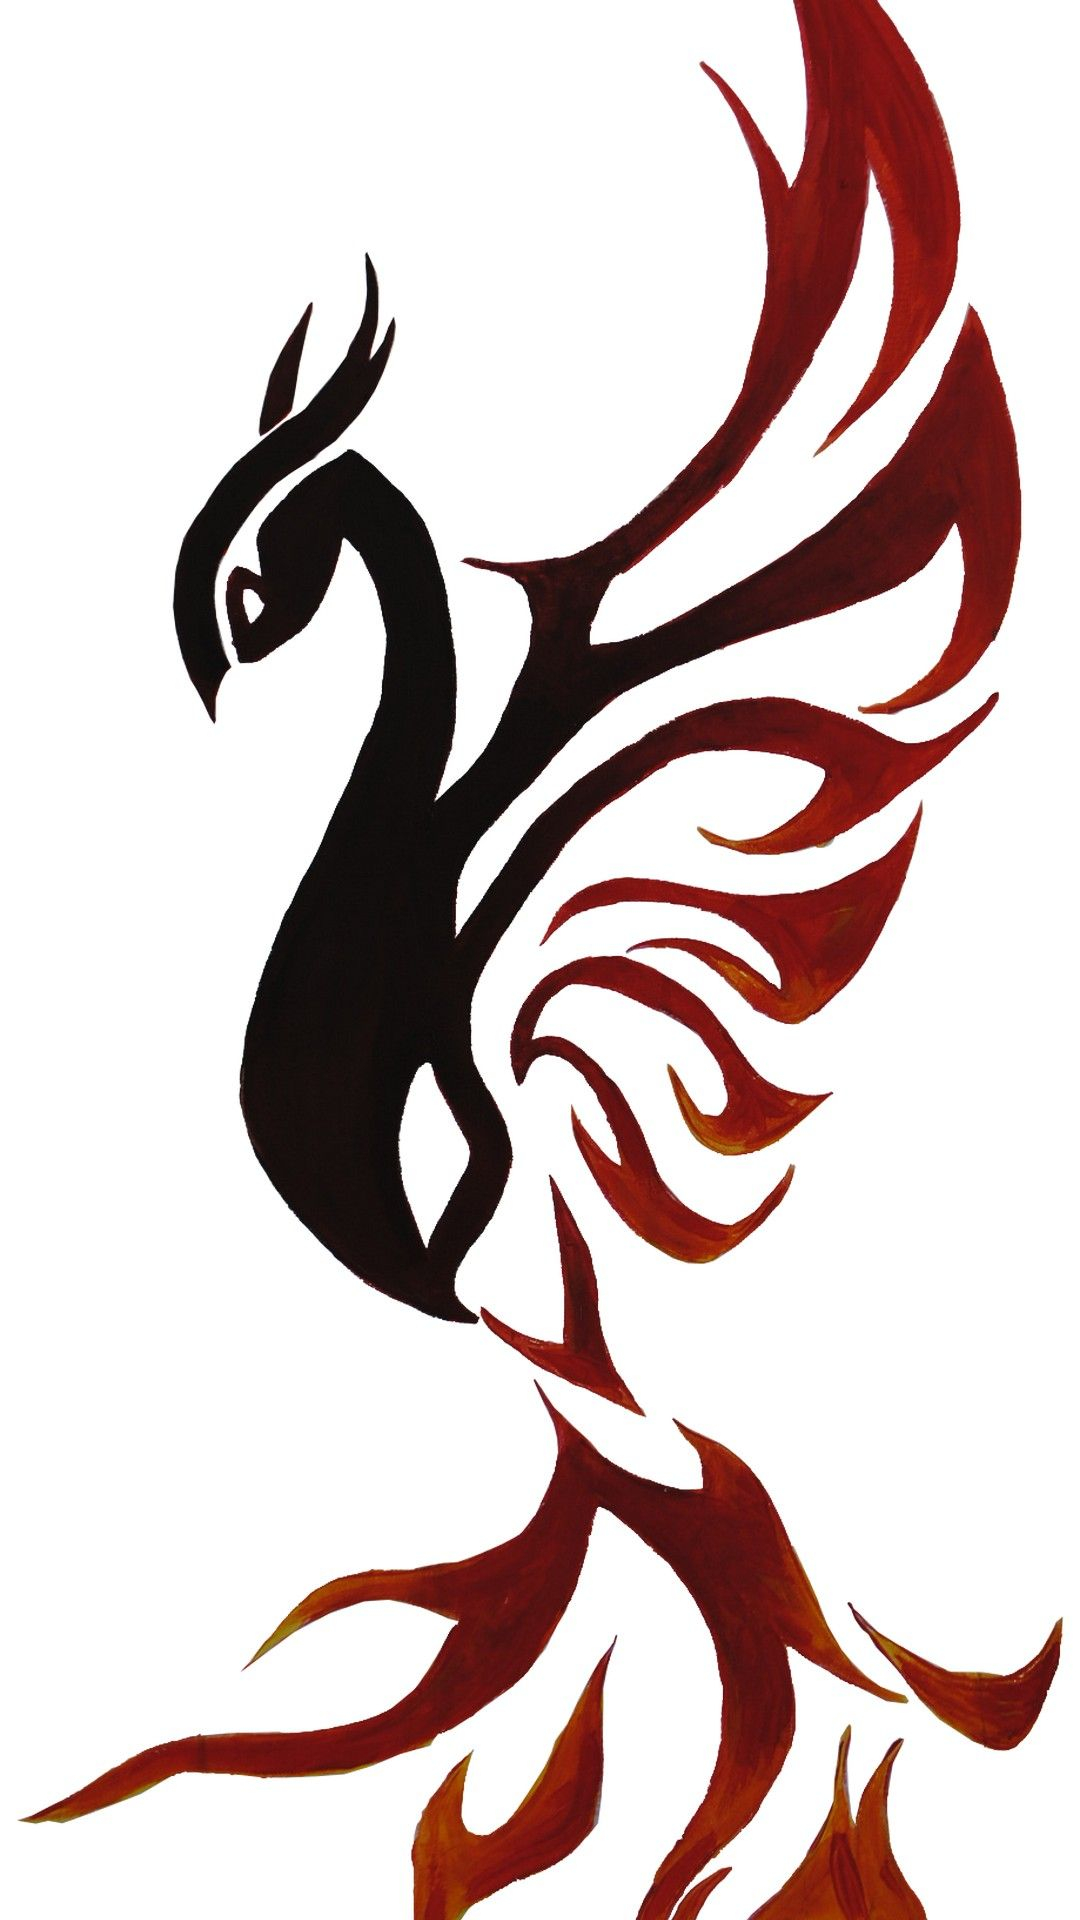 1080x1920 Phoenix Images Android Wallpaper Best Mobile Wallpaper | Phoenix tattoo, Small phoenix tattoos, Phoenix tattoo desig